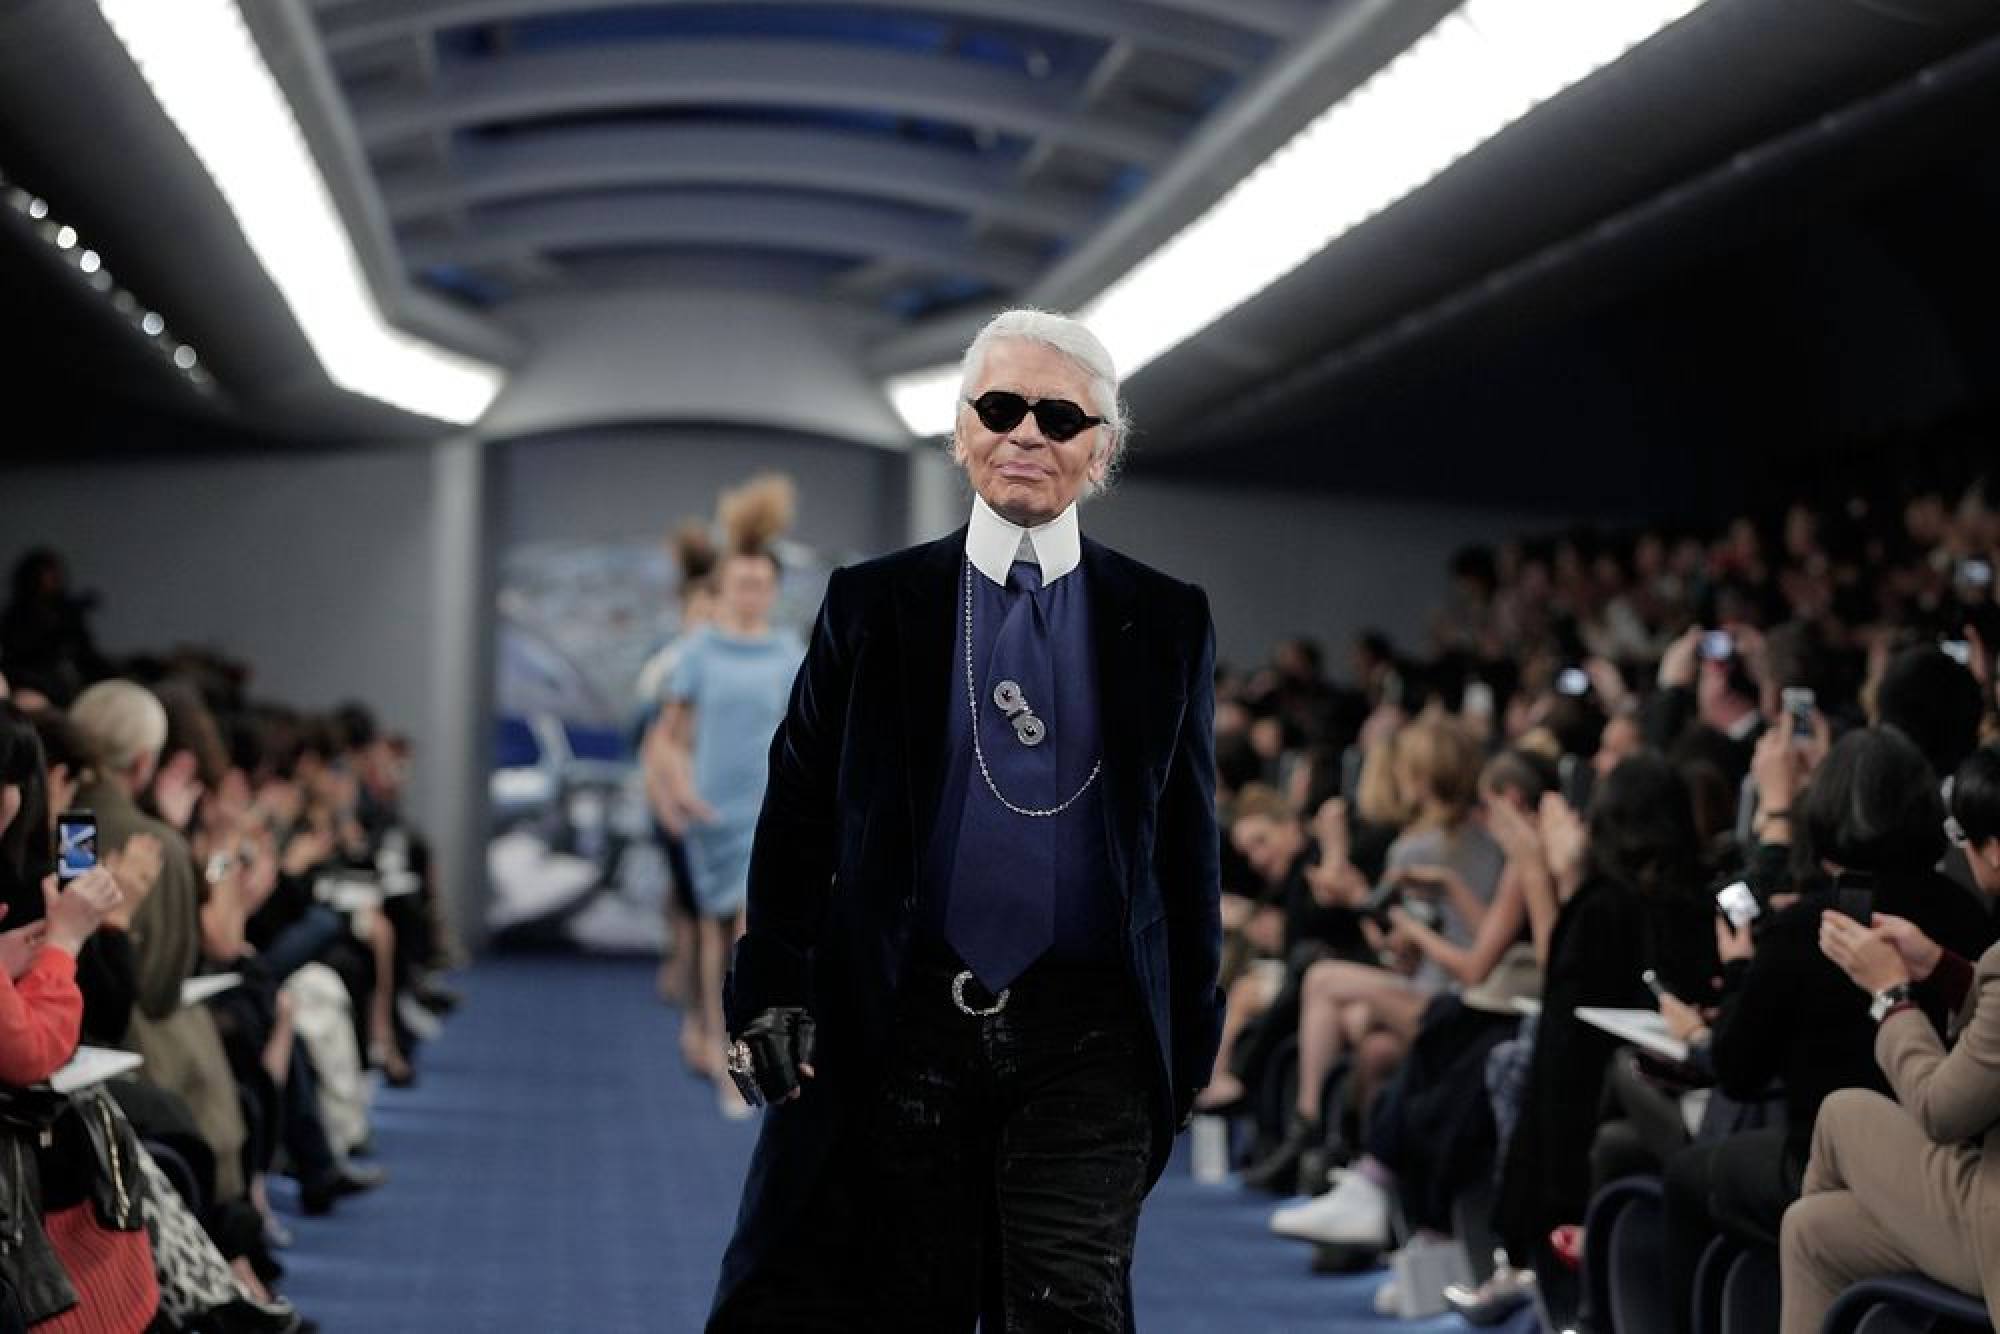 EXCLUSIVE: Karl Lagerfeld's Latest Collaboration Has a 'Queer' Bent